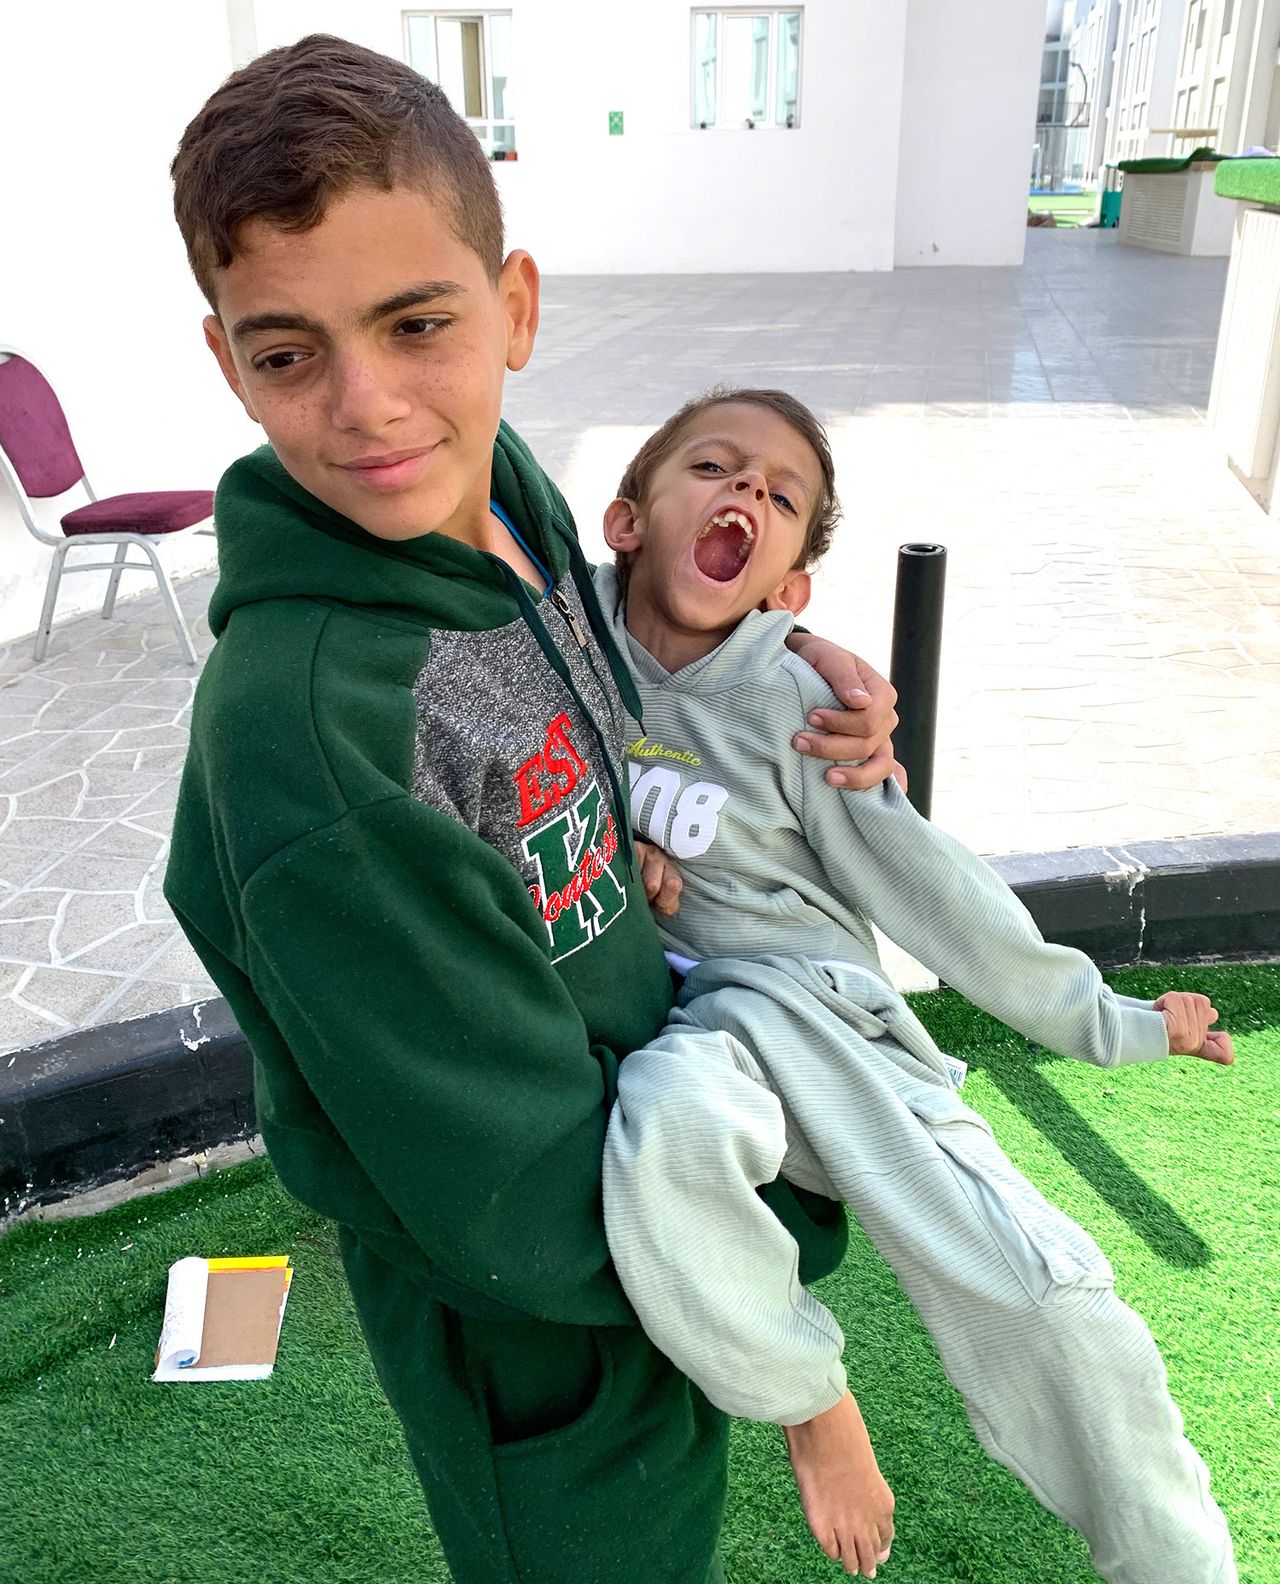 Anas (left) and his brother Adham were hit by Israeli bombing while seeking firewood for their family.